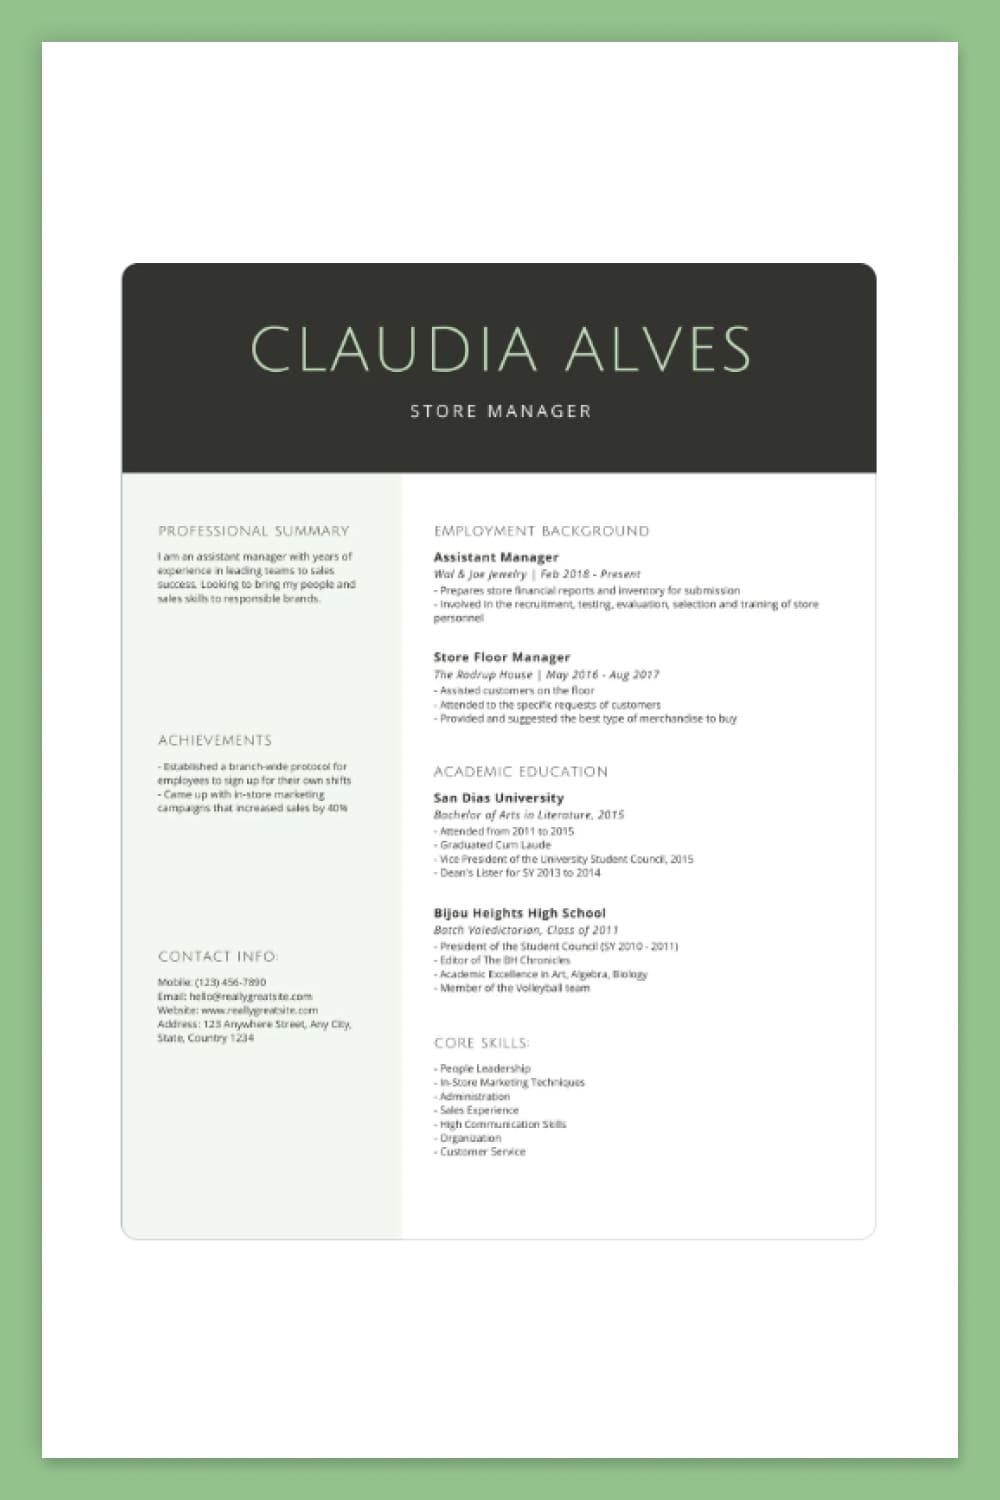 Two-column resume with black, gray and white color scheme.